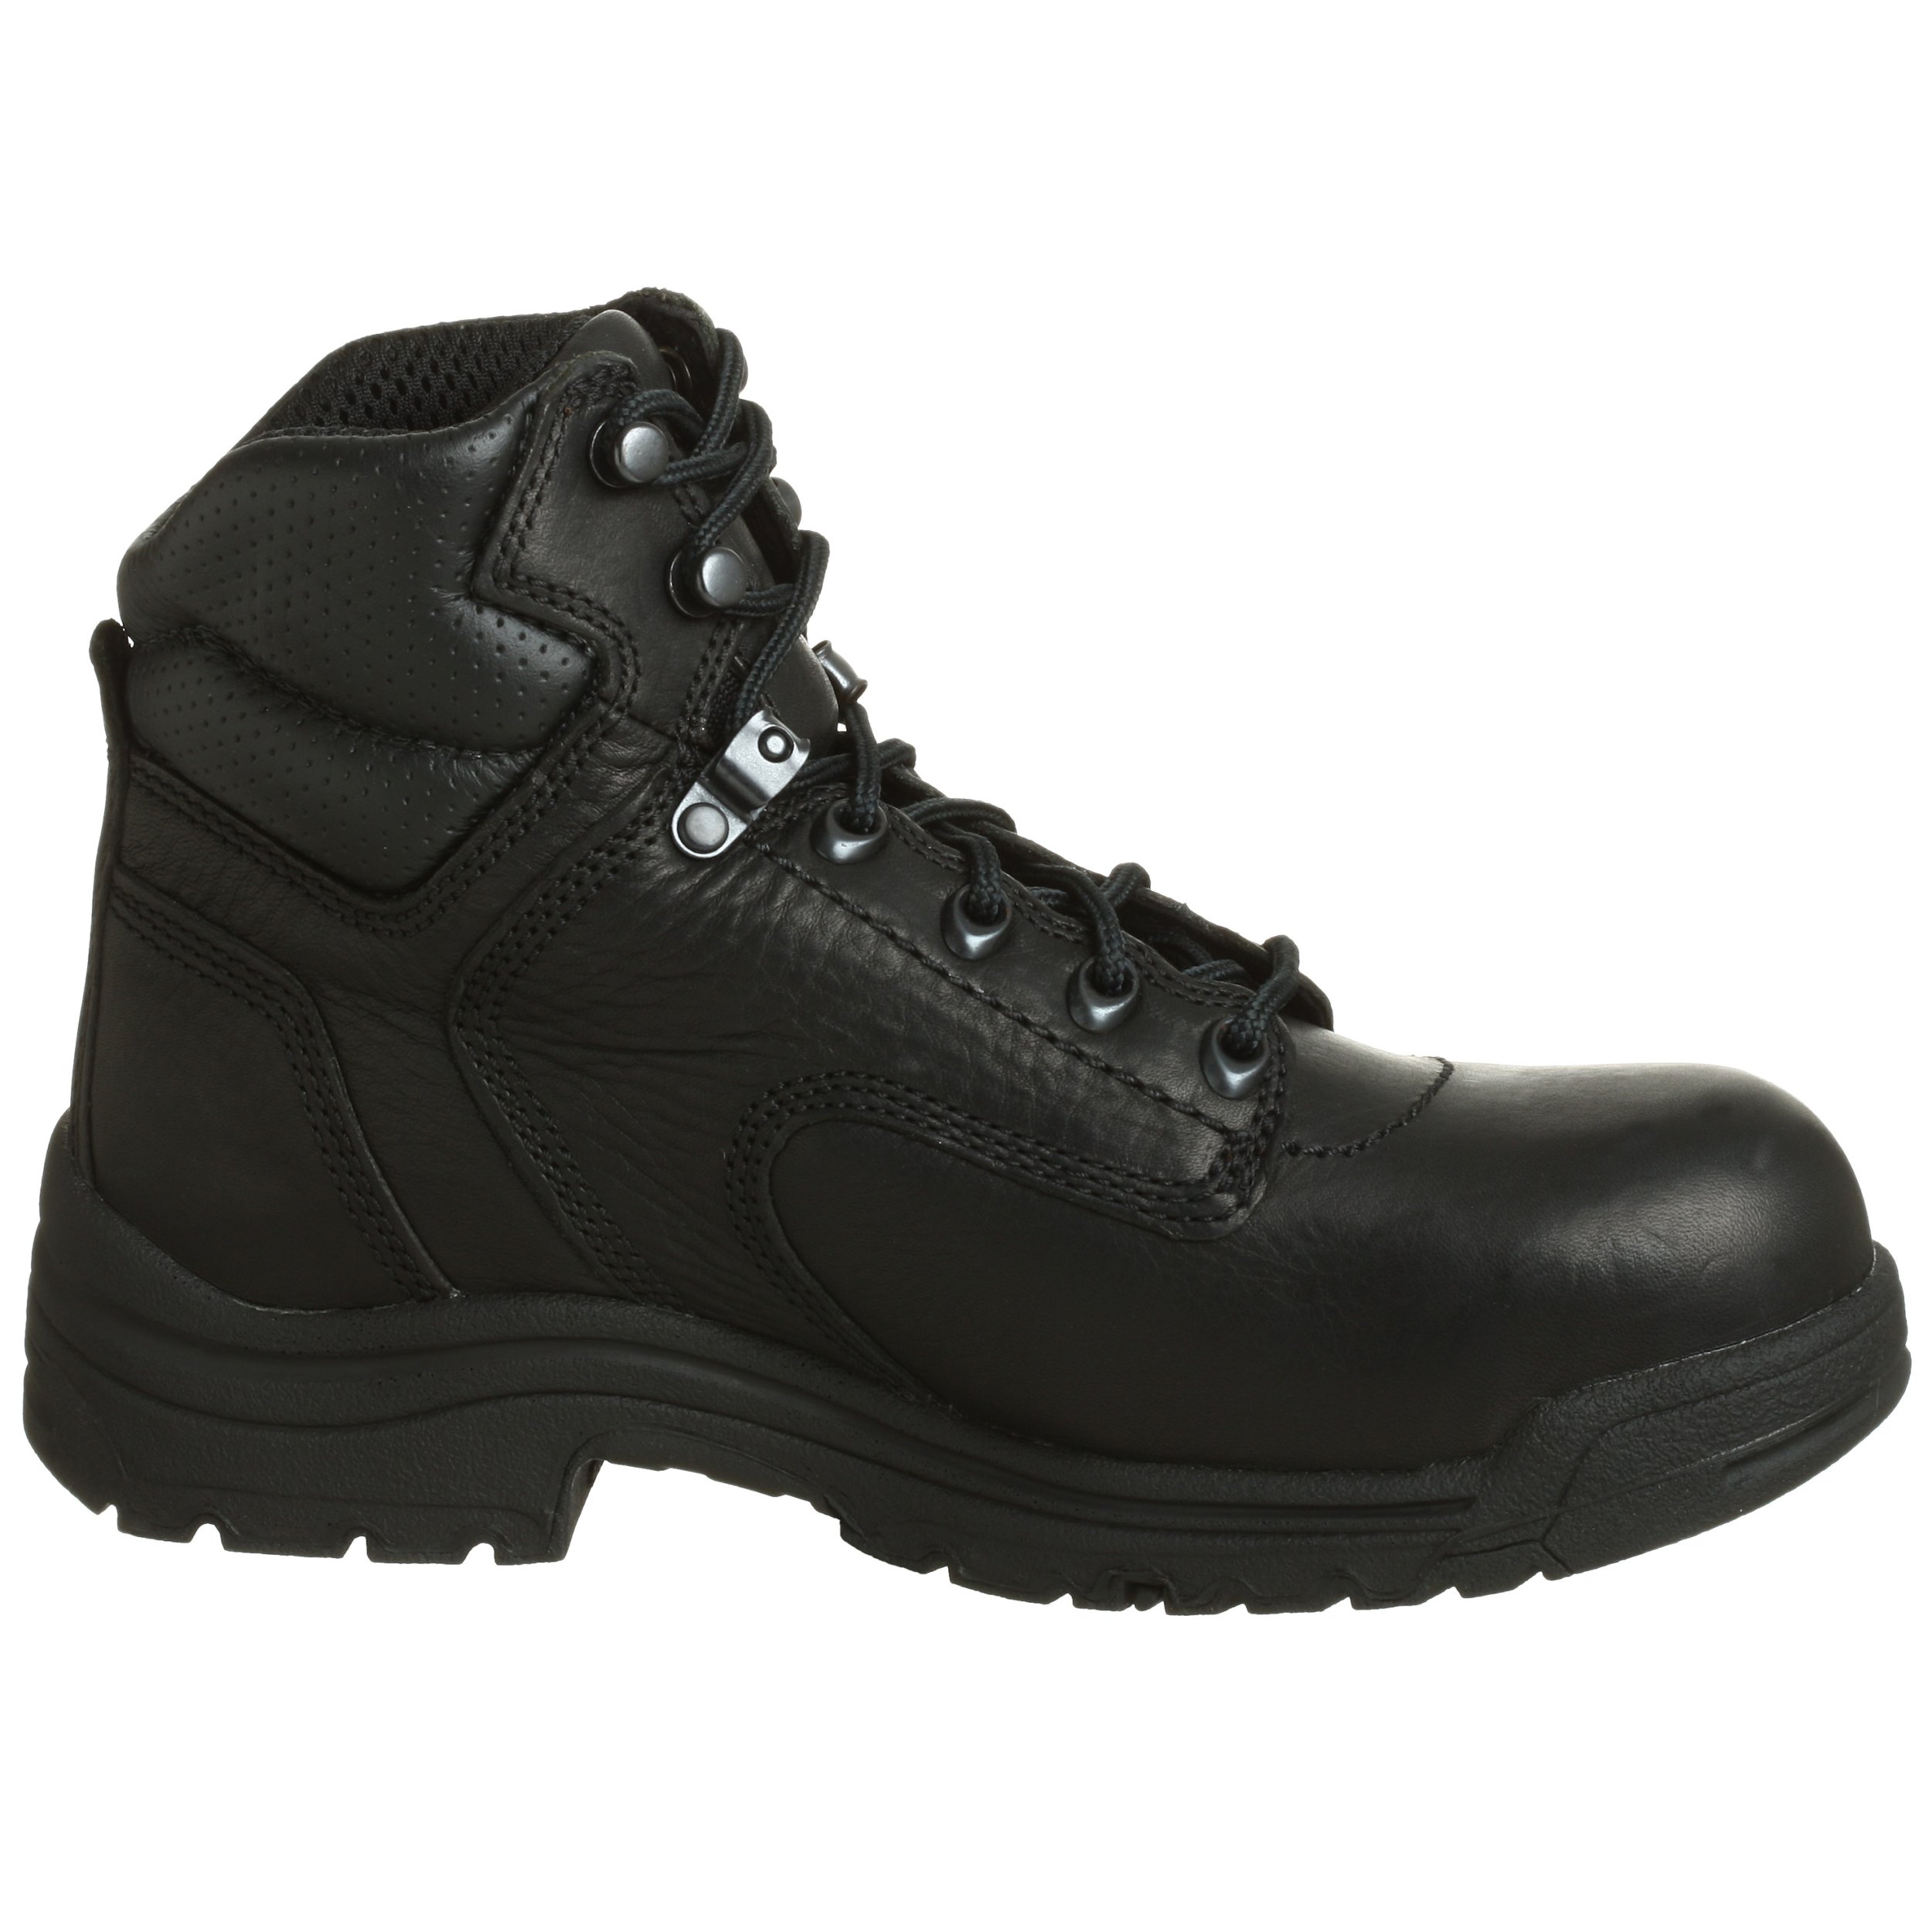 Timberland PRO Women's Titan 6 Inch Alloy Safety Toe Industrial Work Boot